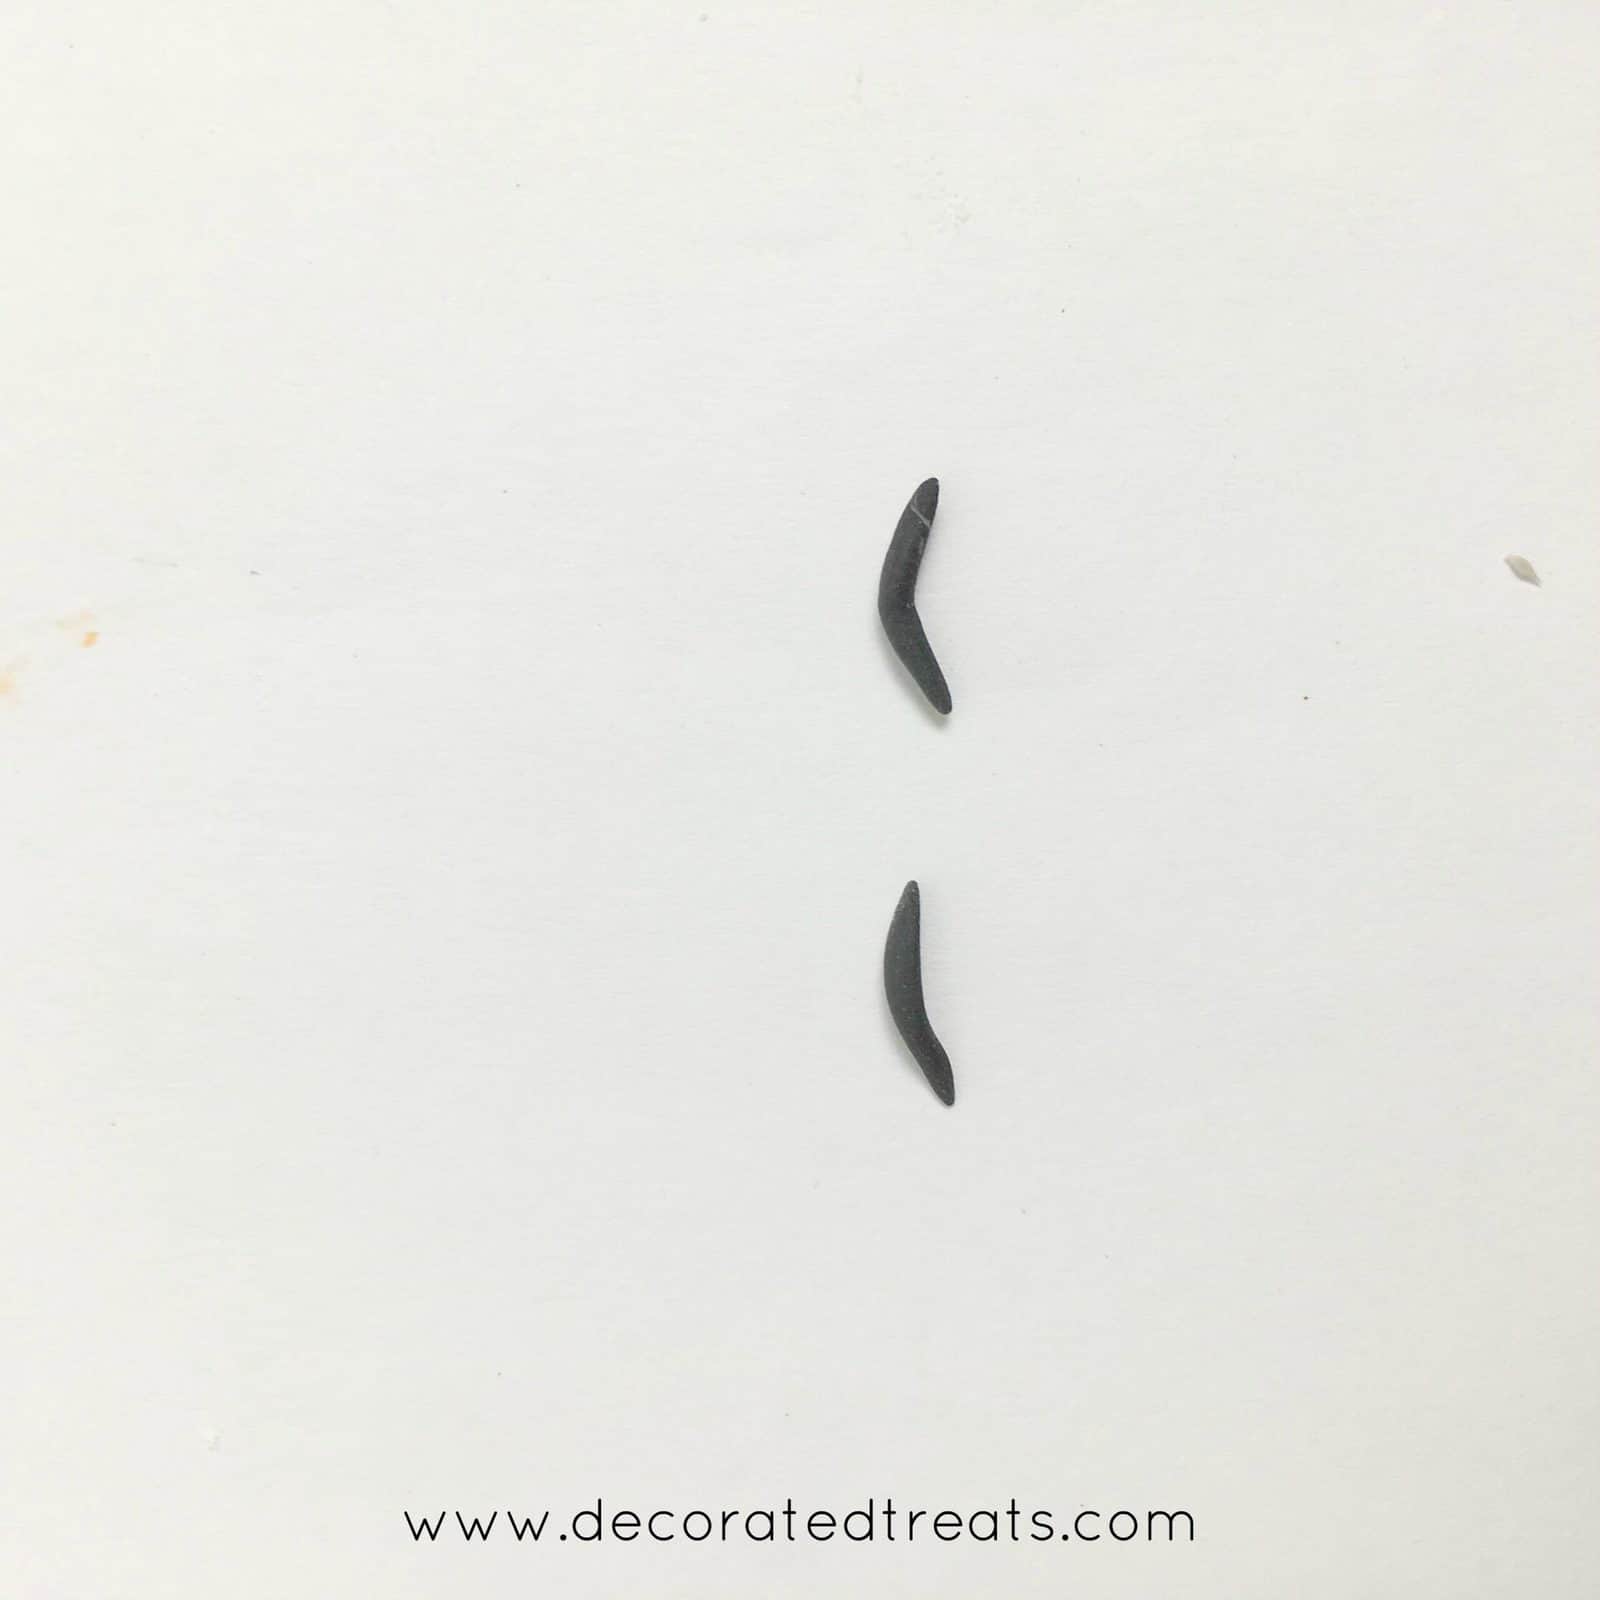 Tiny black fondant brows on a piece of white paper